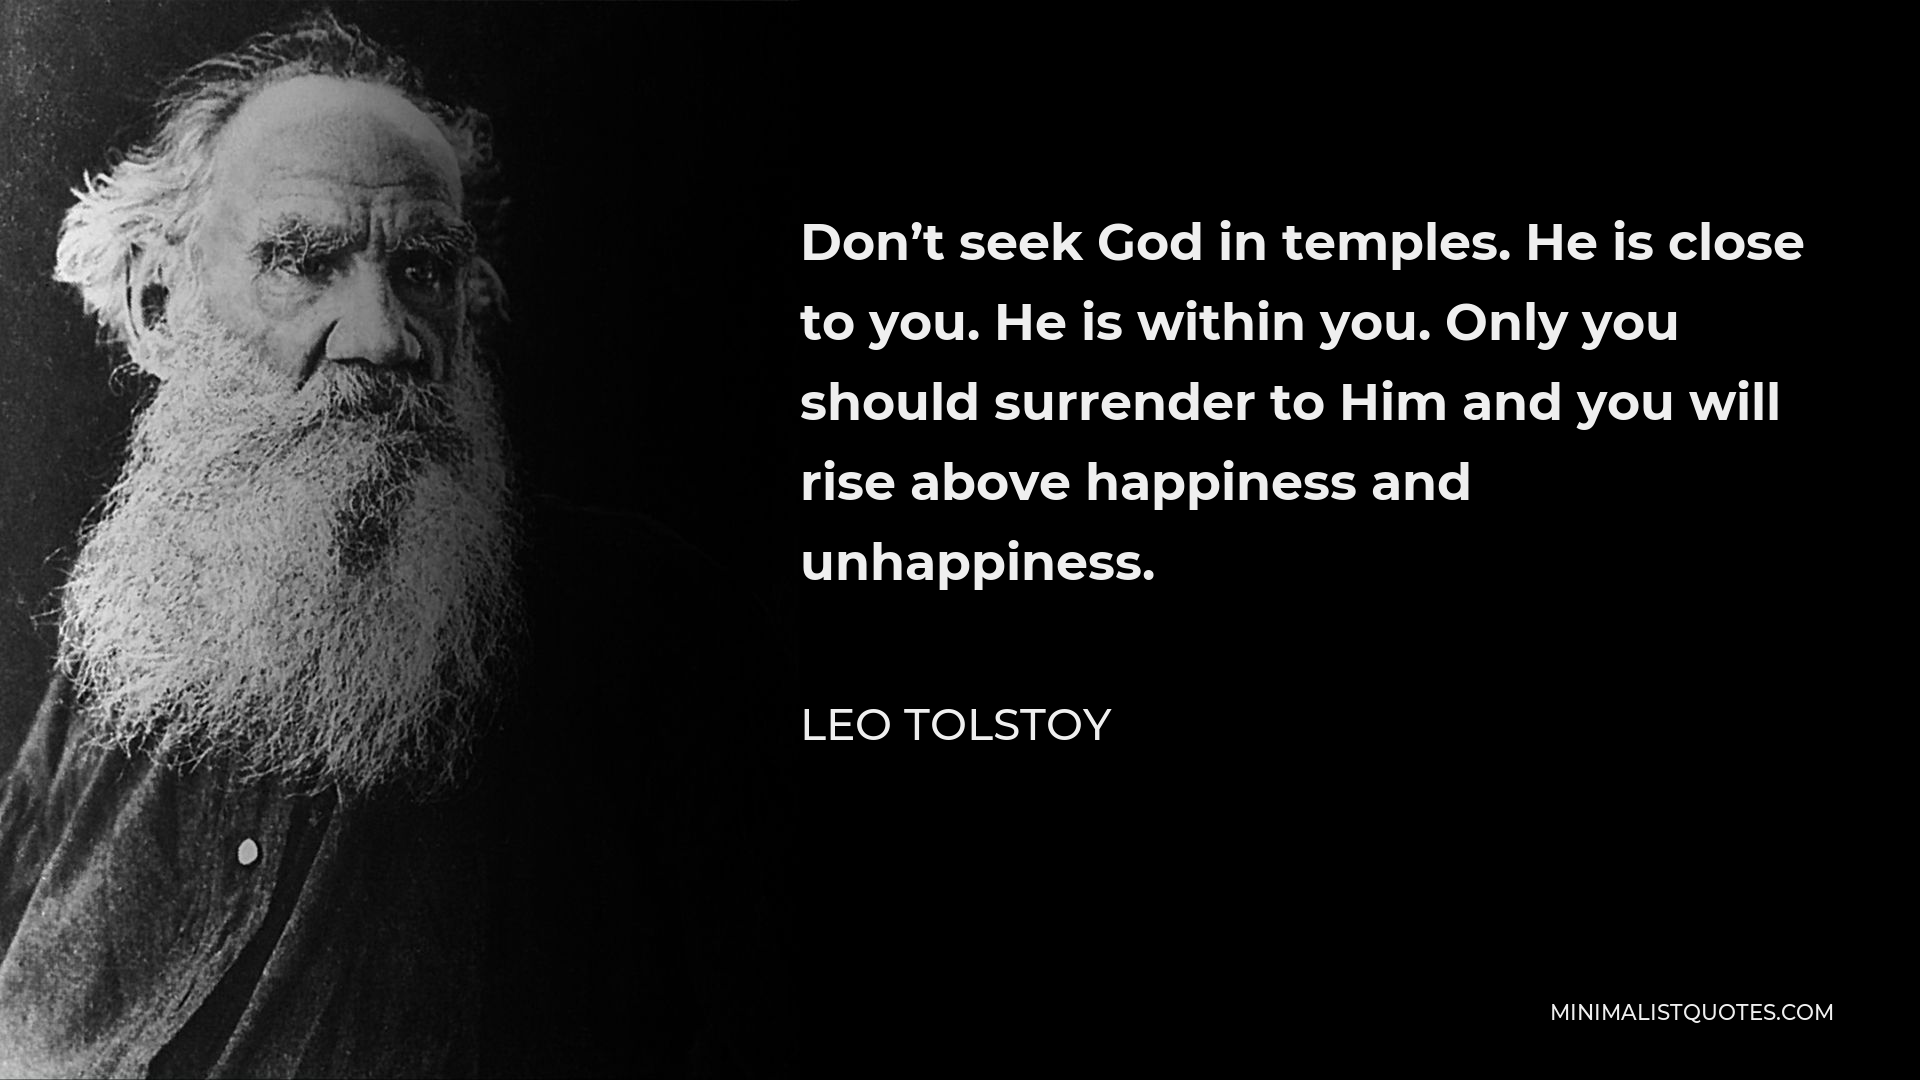 Leo Tolstoy Quote - Don’t seek God in temples. He is close to you. He is within you. Only you should surrender to Him and you will rise above happiness and unhappiness.